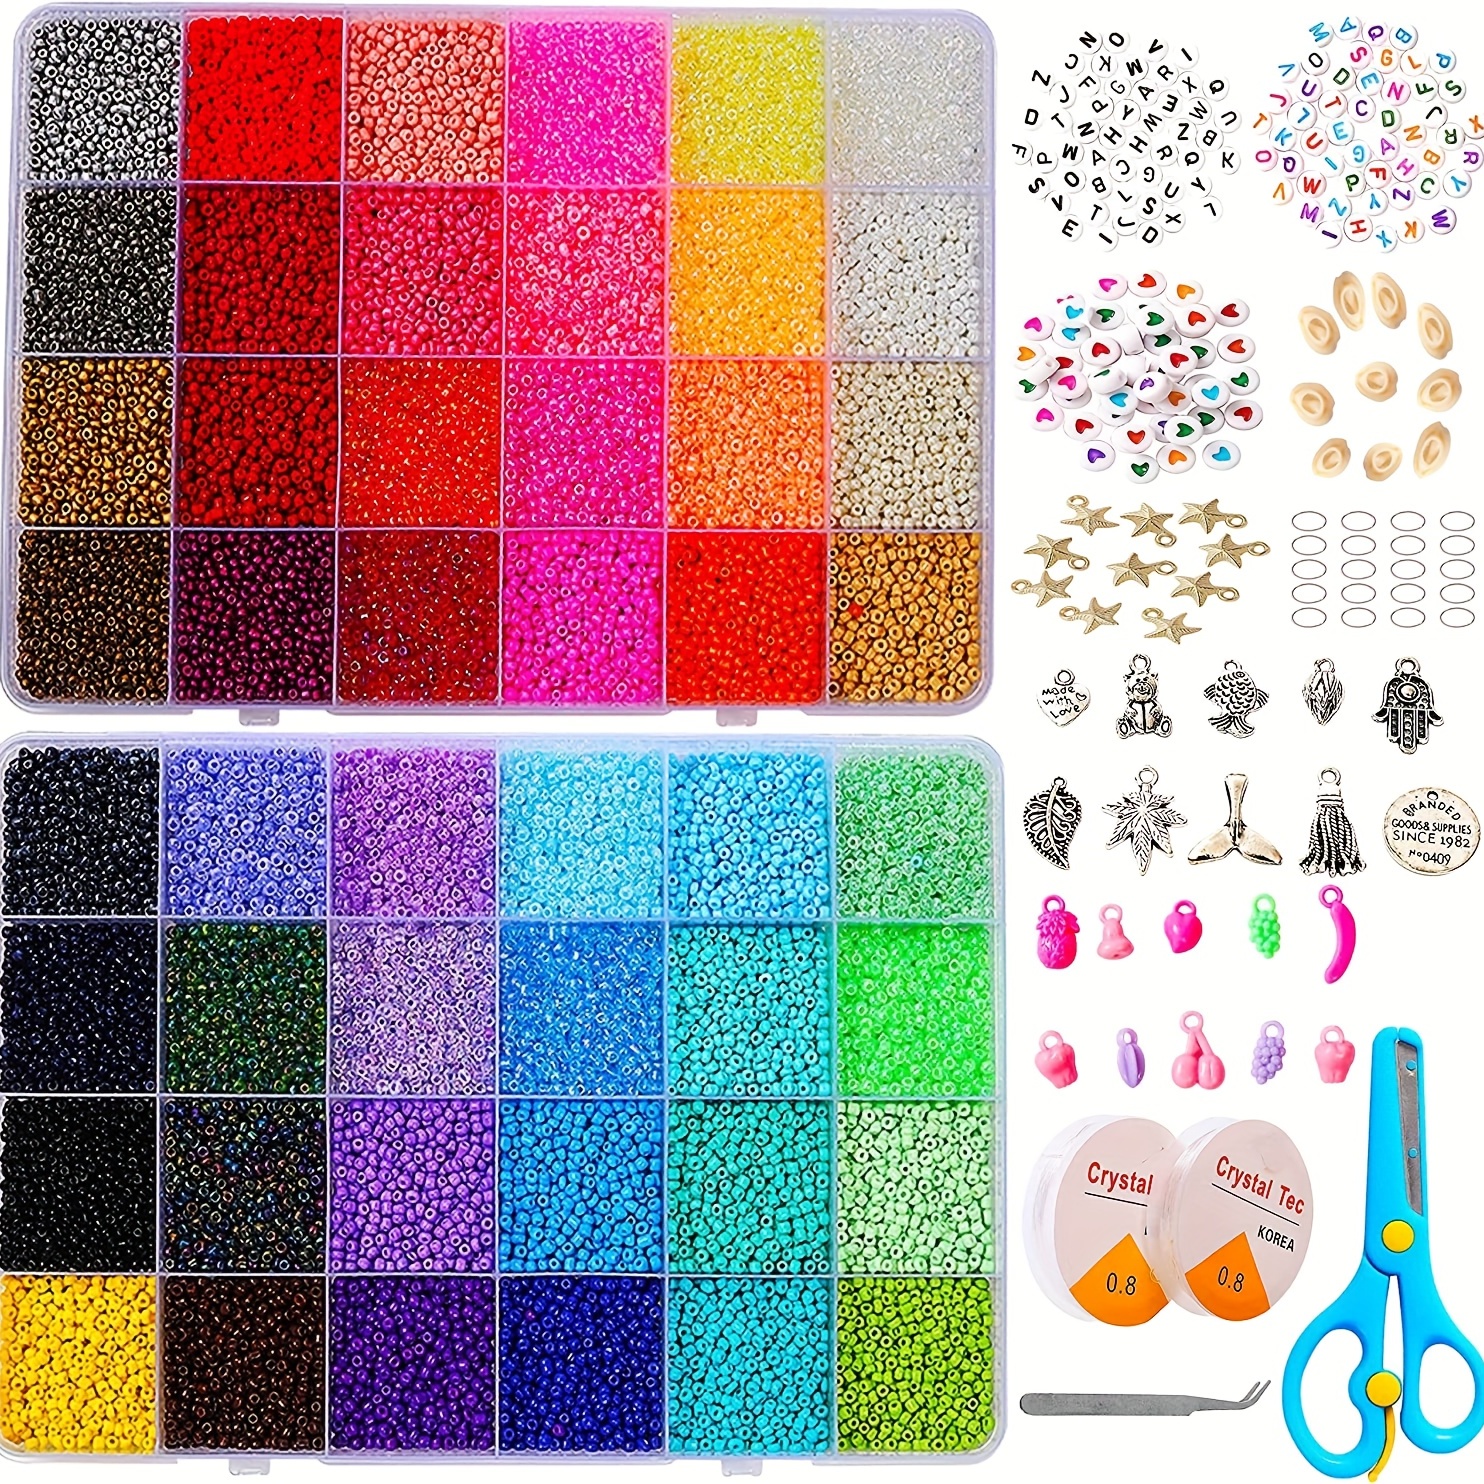 Glass Seed Beads For Jewelry Making - 3mm Glass Beads For Beaded Bracelets  In - Set 1